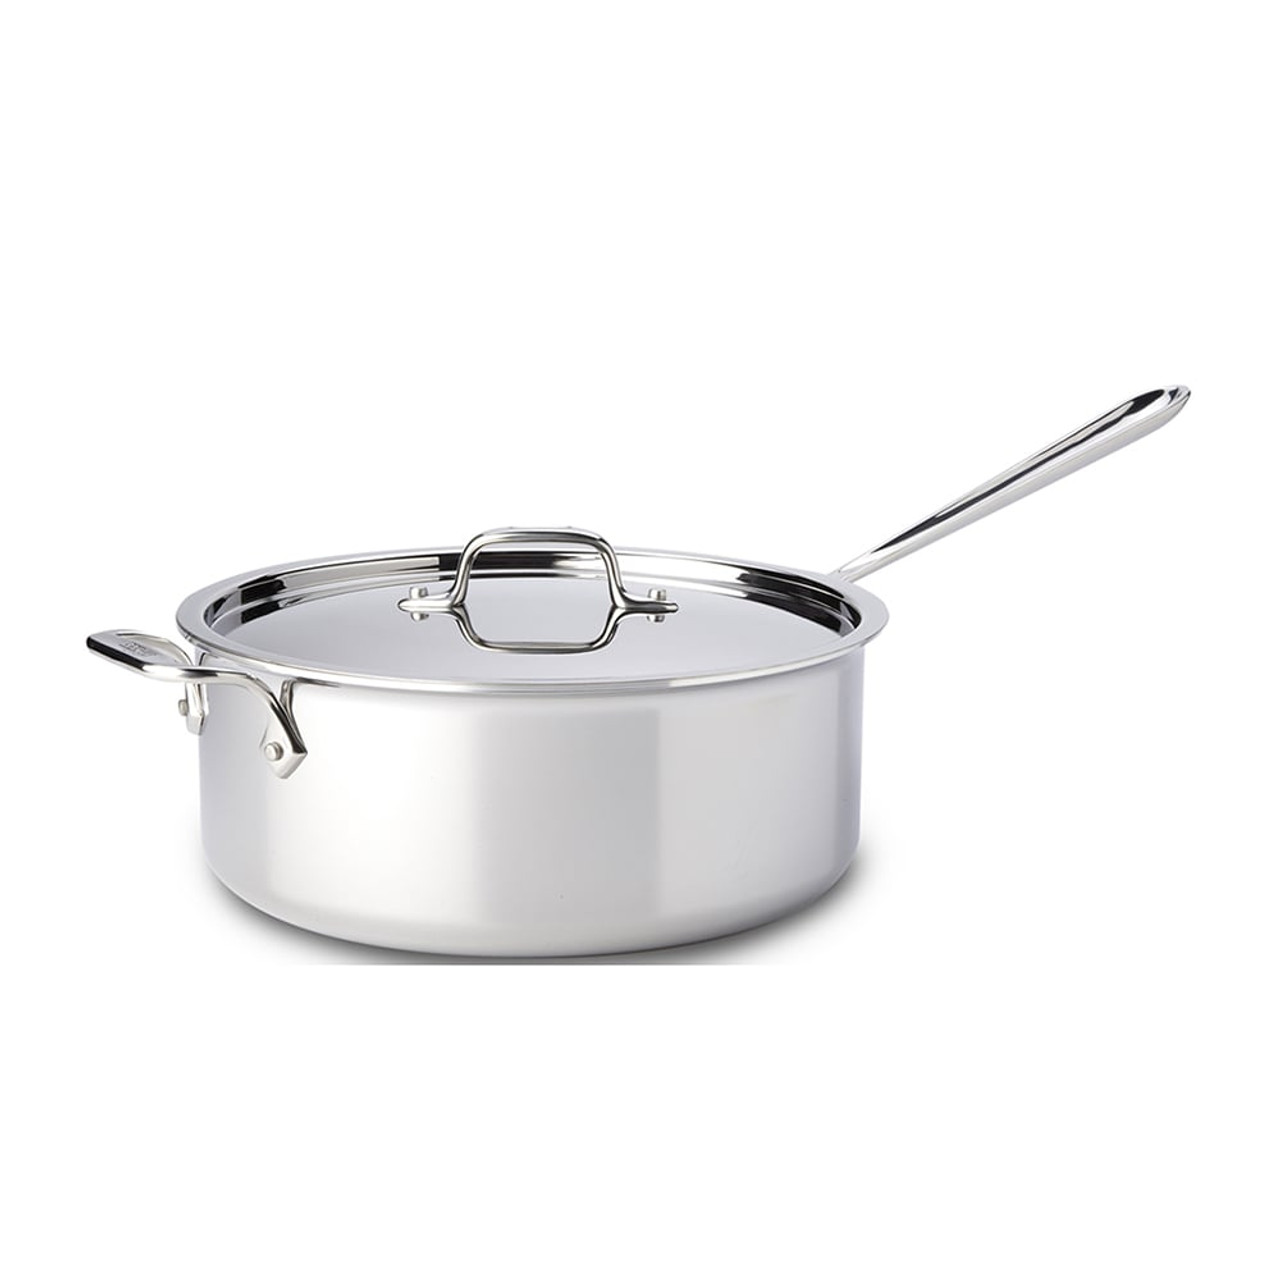 https://cdn11.bigcommerce.com/s-hccytny0od/images/stencil/1280x1280/products/495/8461/all-clad-stainless-steel-deep-saute-pan-6qt__43087.1555850238.jpg?c=2?imbypass=on